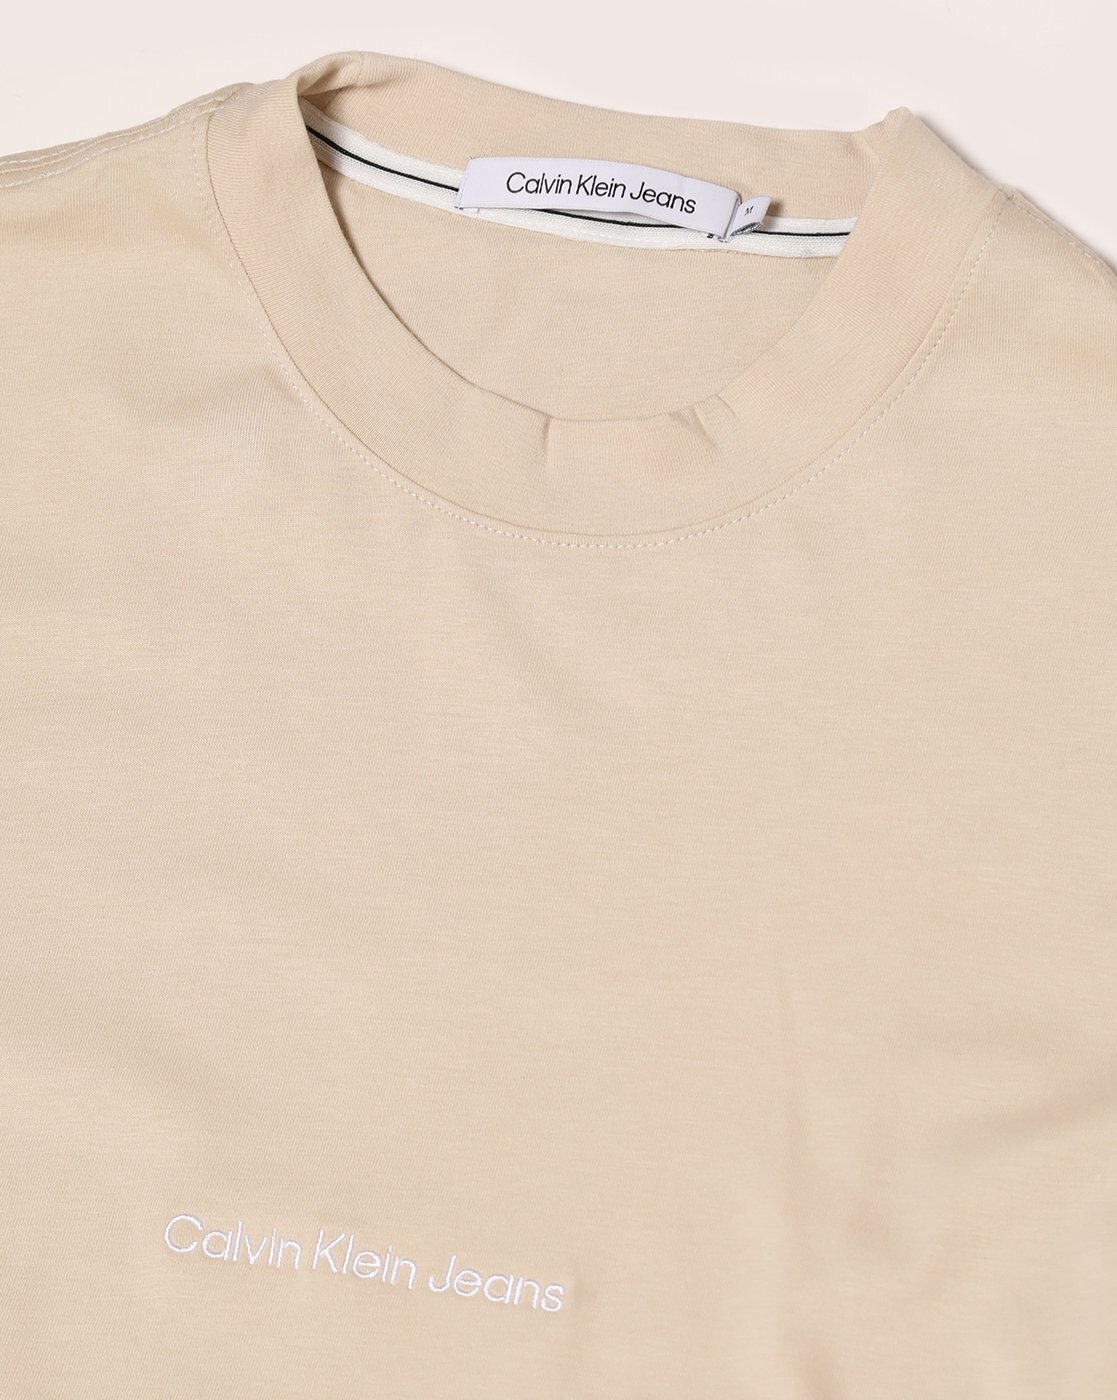 Abholzung Buy Beige Tshirts for Men Klein by Calvin Jeans Online